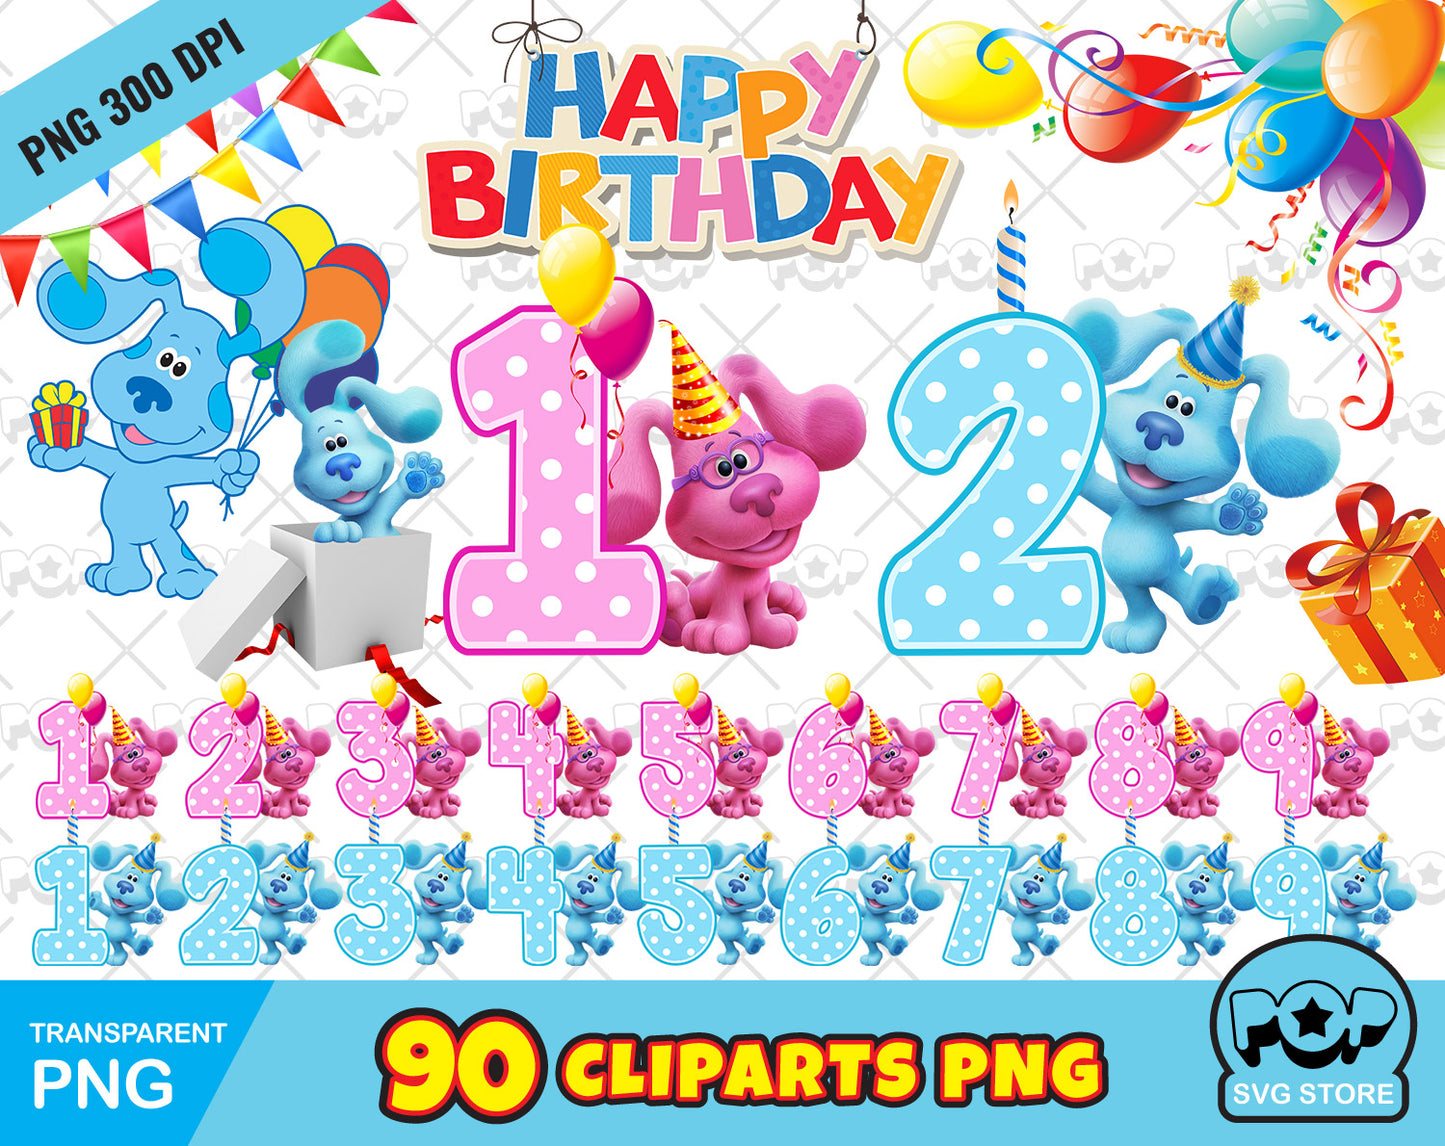 Blue's Clues Birthday Clipart PNG, Blues Clues Bday png cut file for Cricut Silhouette, instant download